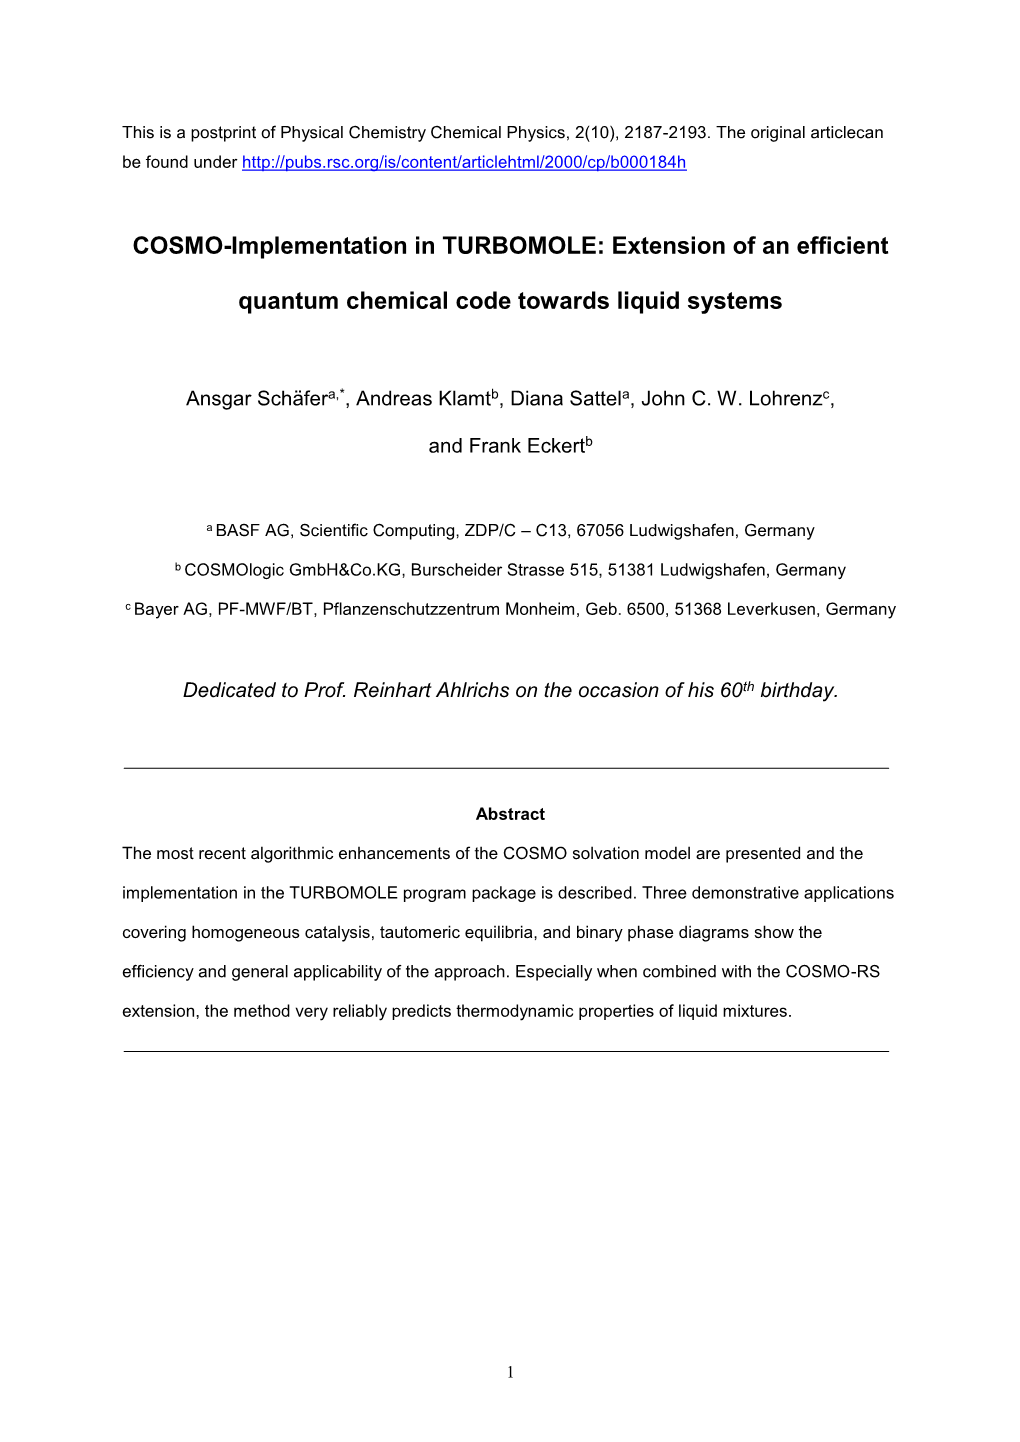 COSMO-Implementation in TURBOMOLE: Extension of an Efficient